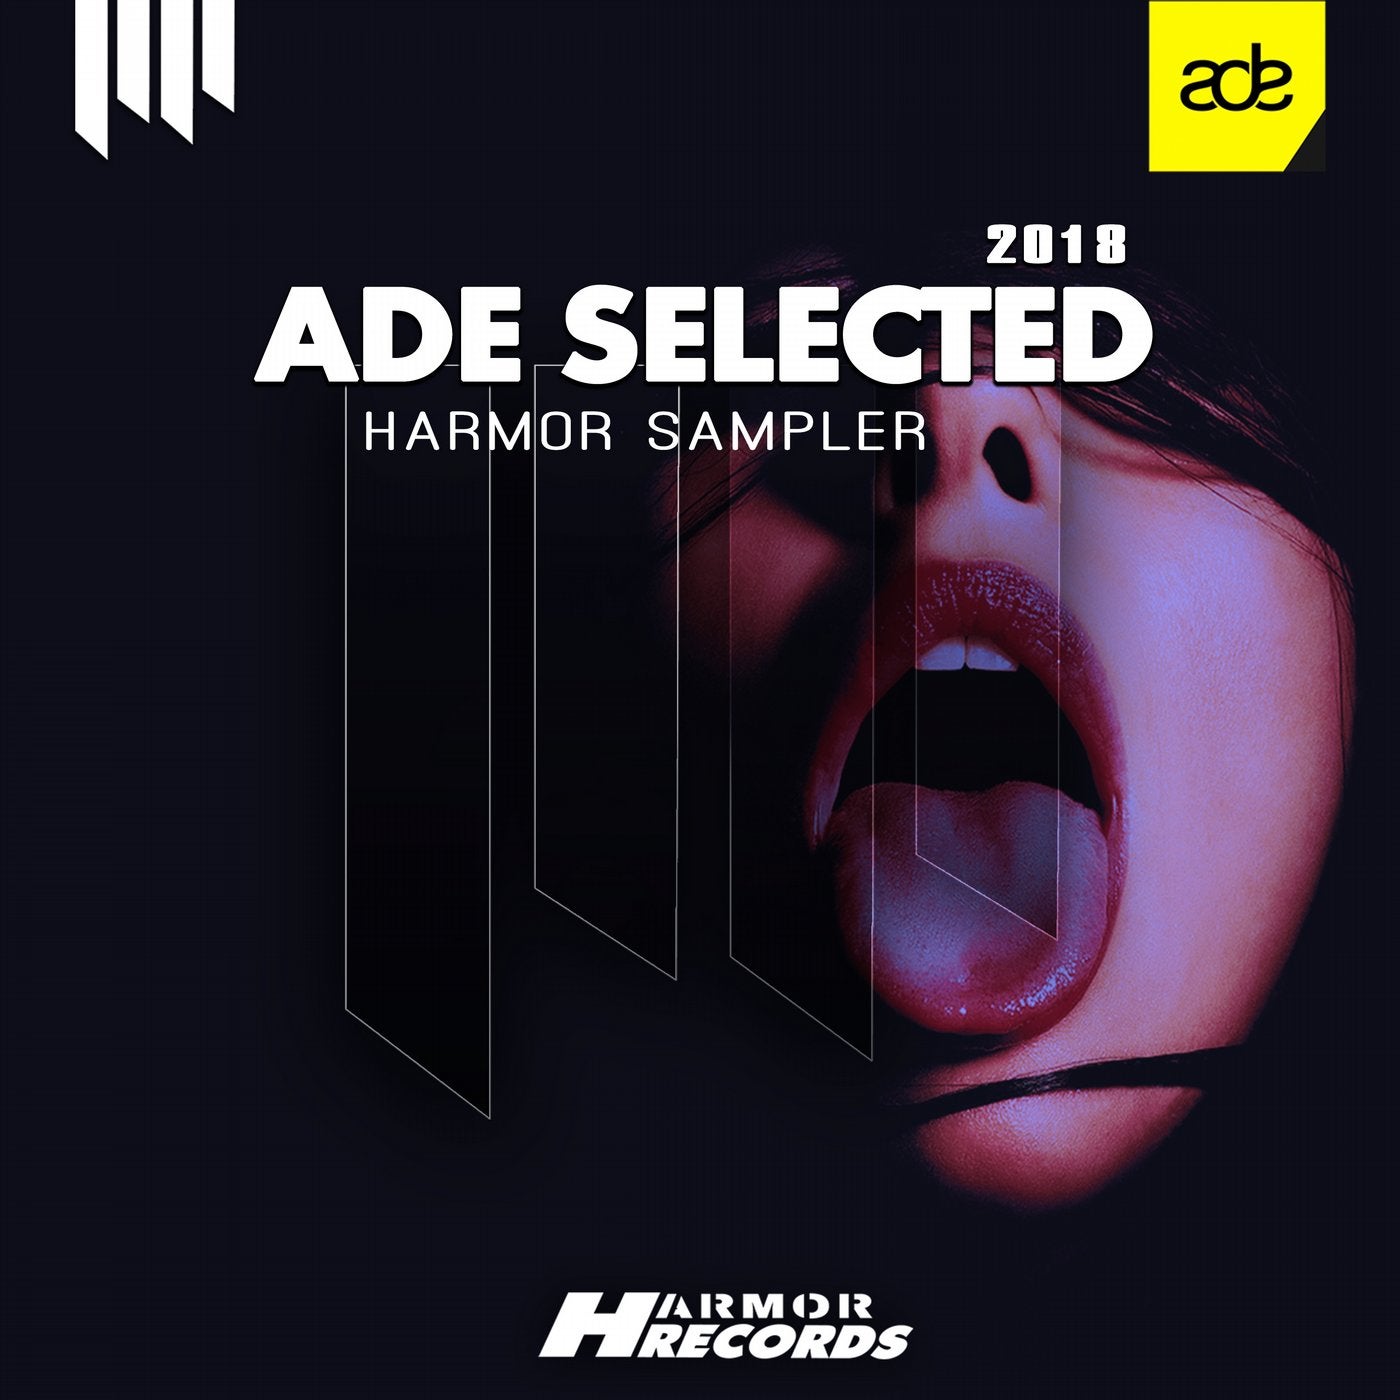 Ade Selected 2018